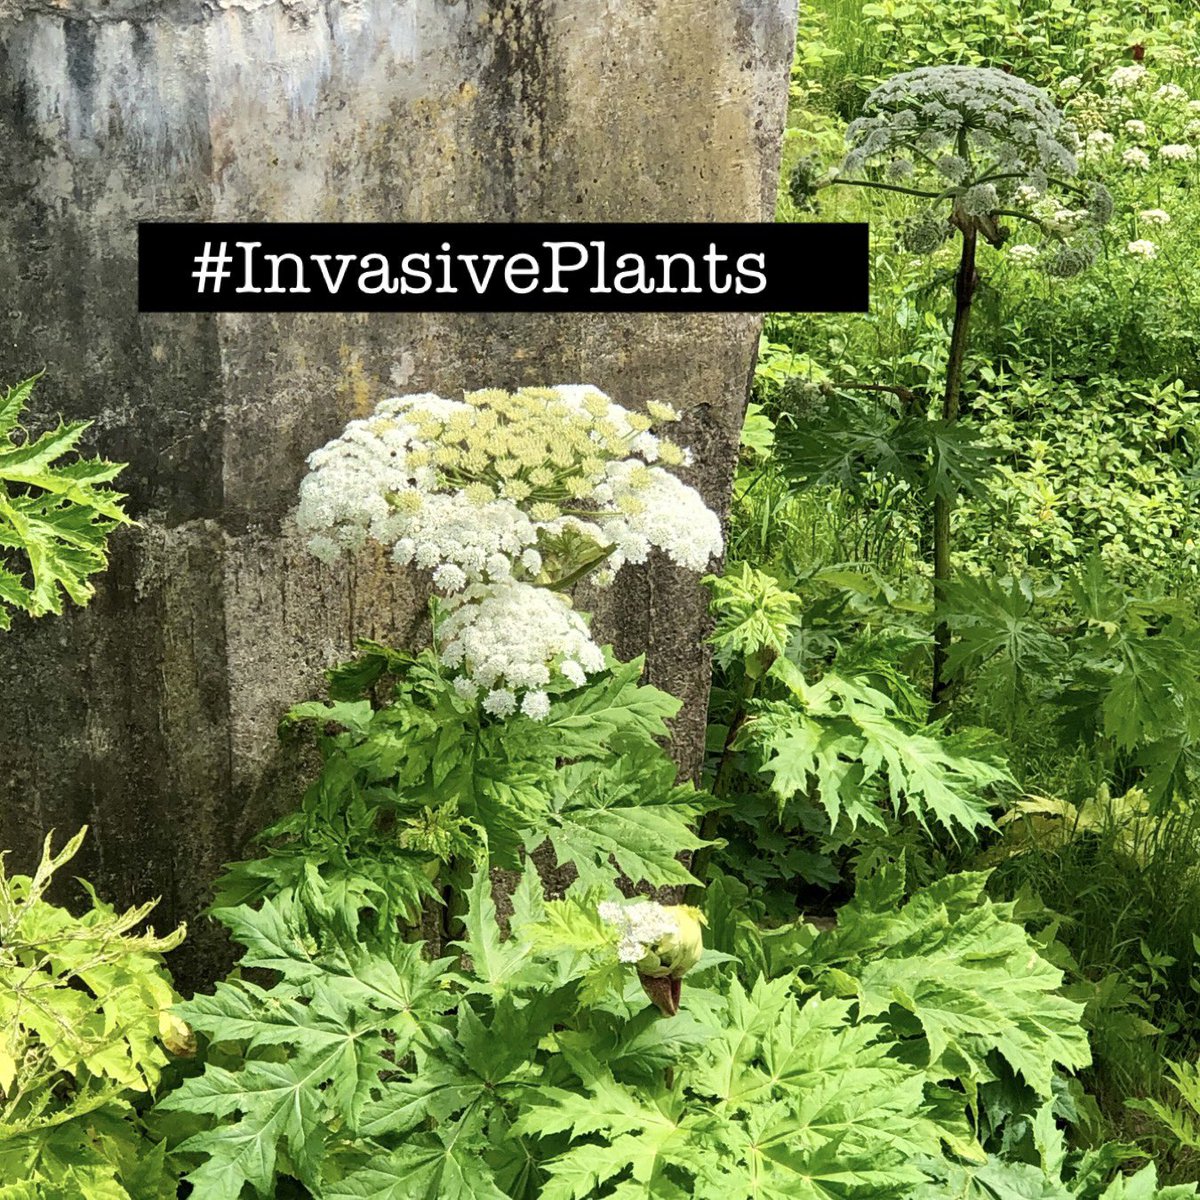 It’s #InvasiveSpeciesWeek & for the #WildflowerHour challenge we are focusing on those non-native naturalised plants that are proving problematic! Find one in bloom & share you pics this Sunday using the hashtag #InvasivePlants. Read more here bsbipublicity.blogspot.com/2023/05/invasi…
#INNSWeek